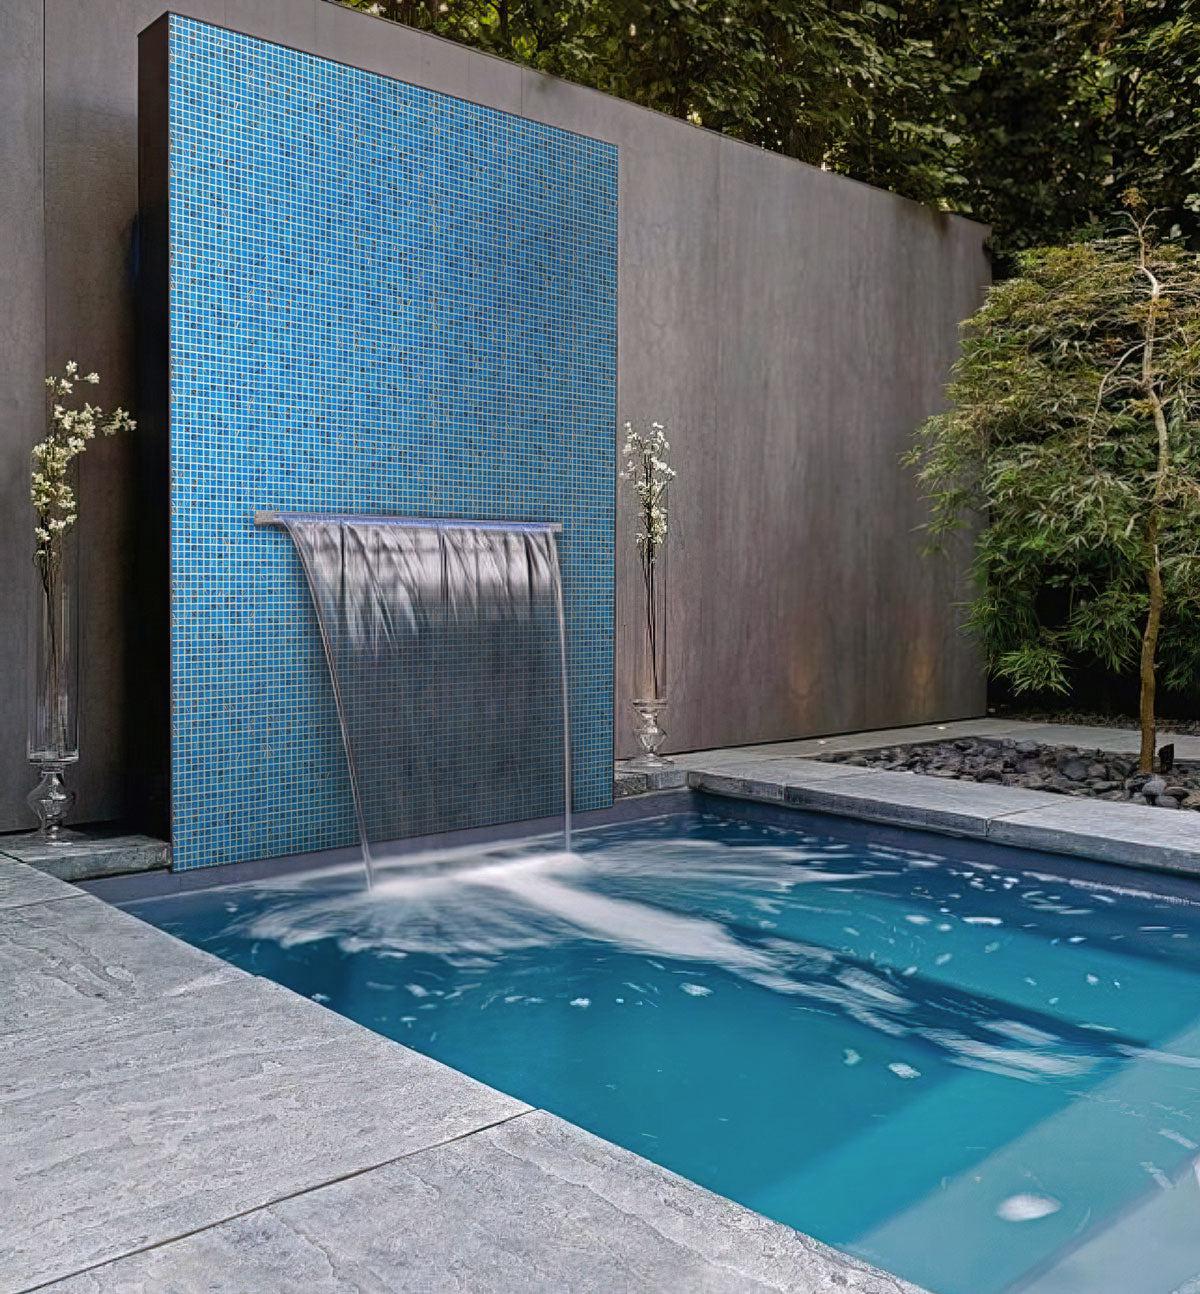 Outdoor Pool lined with Blue and Golden Sparkles Squares Glass Pool Tile